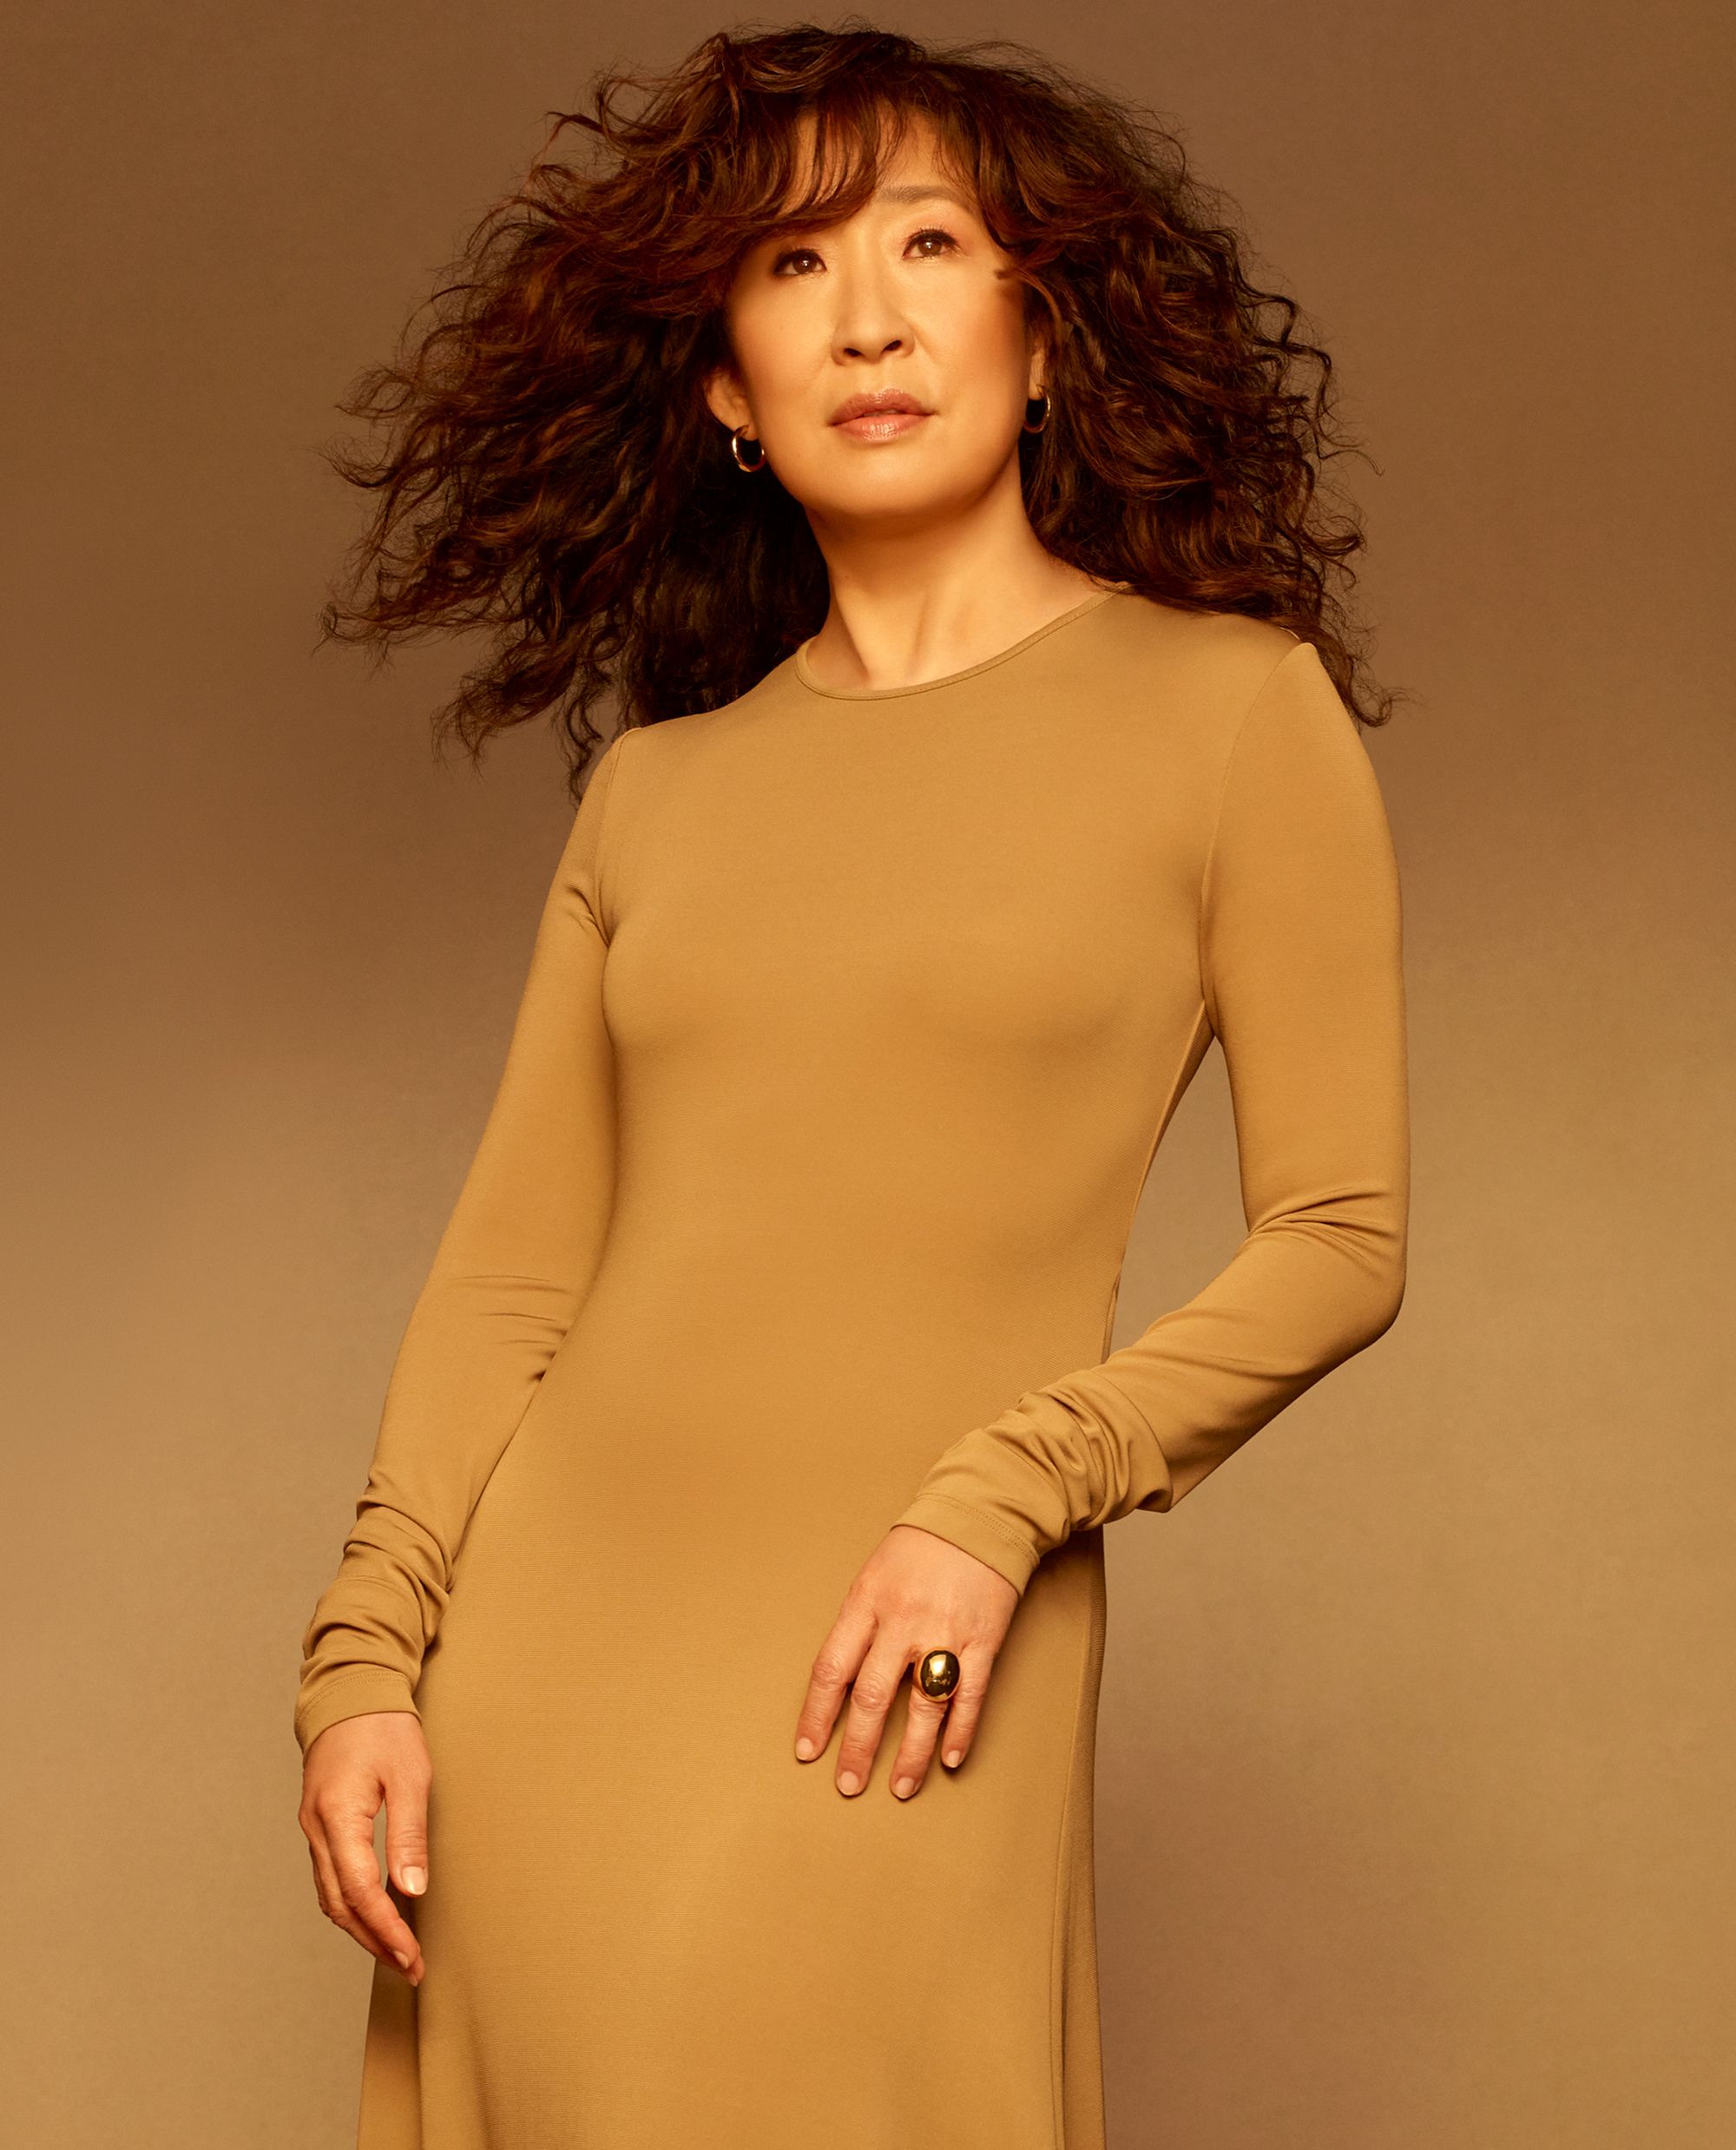 Sandra Oh Is Agitating for Real, Culture-Changing Inclusion image